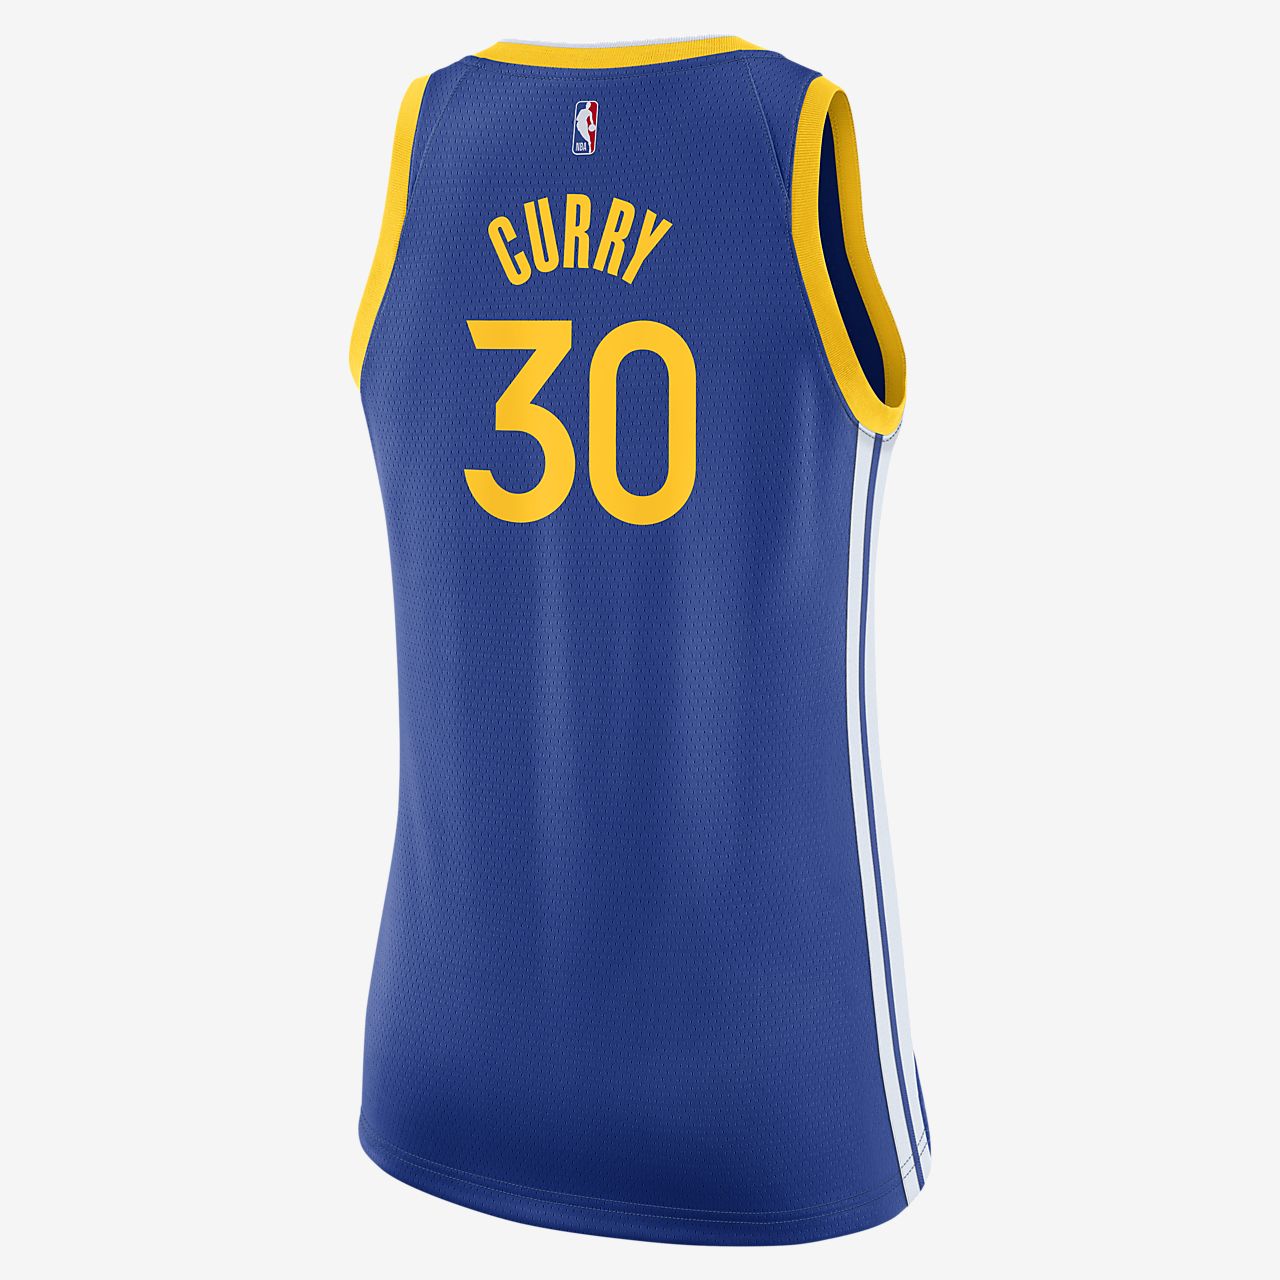 where can i find a stephen curry jersey